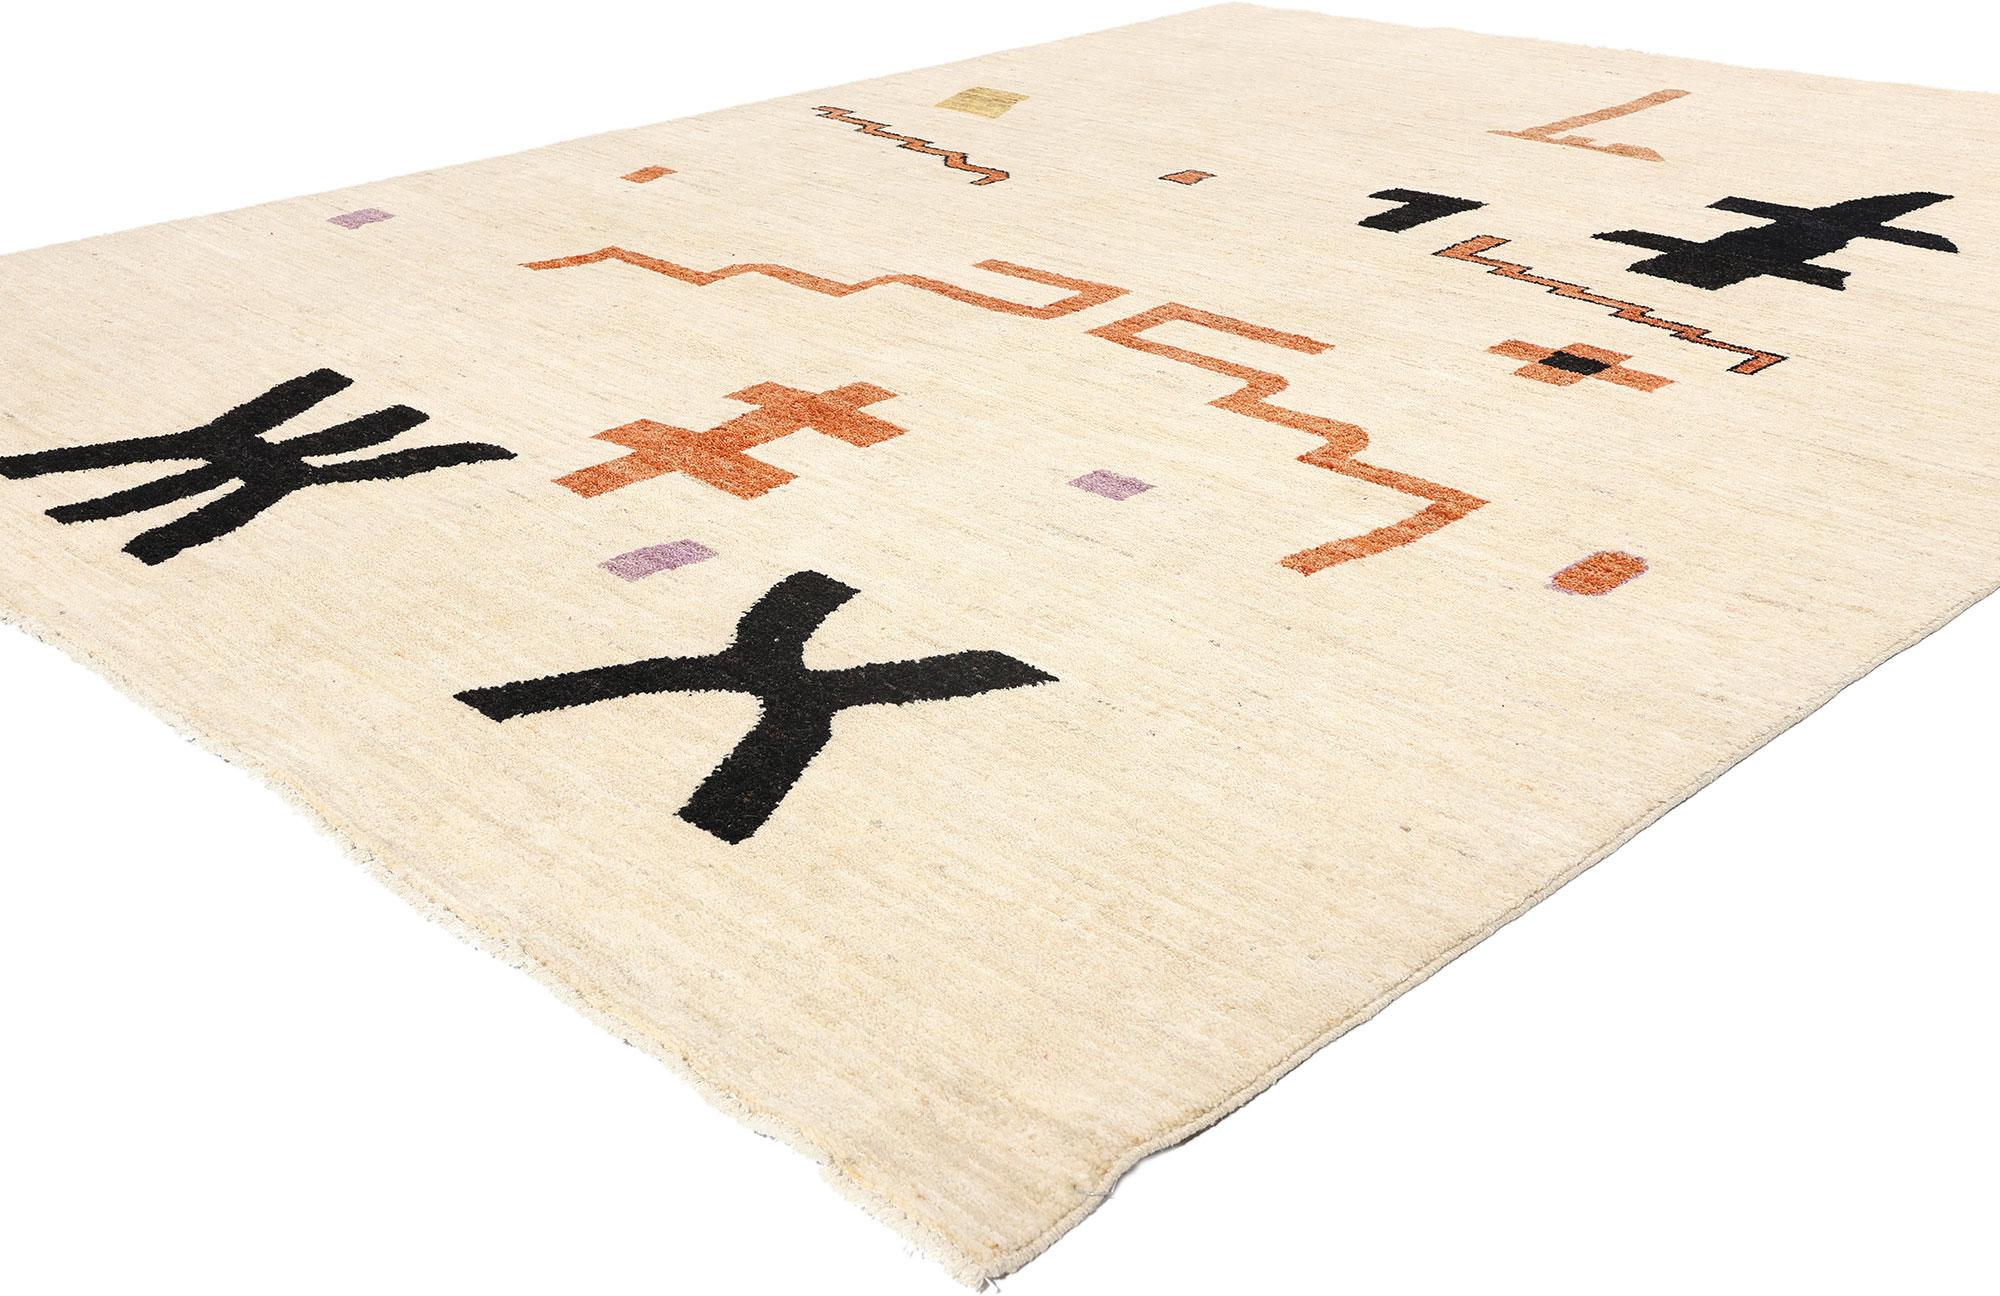 81115 Organic Modern Brutalist Moroccan Rug, 08'00 x 10'01. This stunning hand-knotted wool Organic Modern Moroccan rug seamlessly blends Brutalist-inspired simplicity with tribal enchantment, offering a captivating addition to nearly any space.